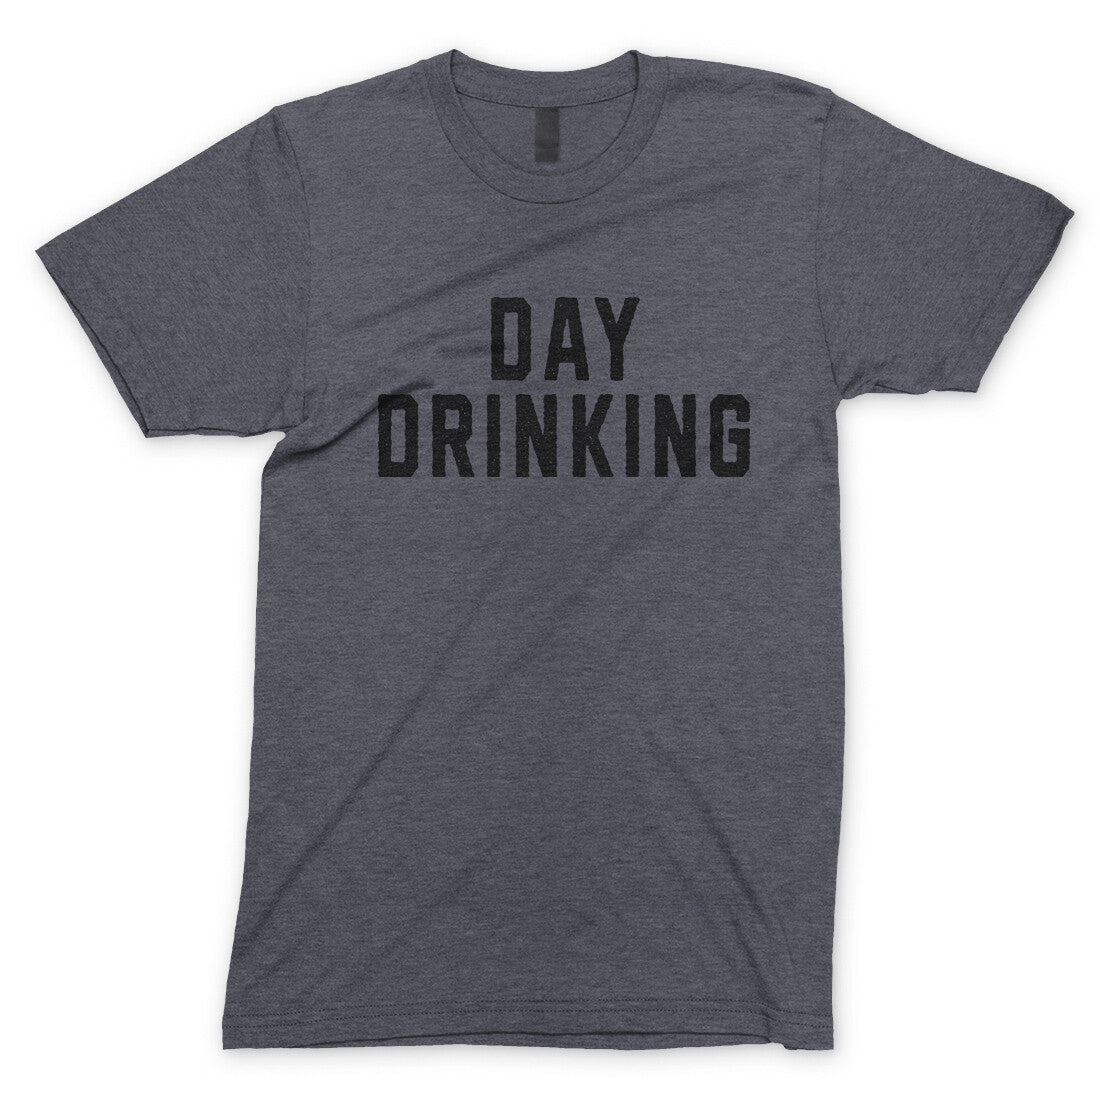 Day Drinking in Dark Heather Color